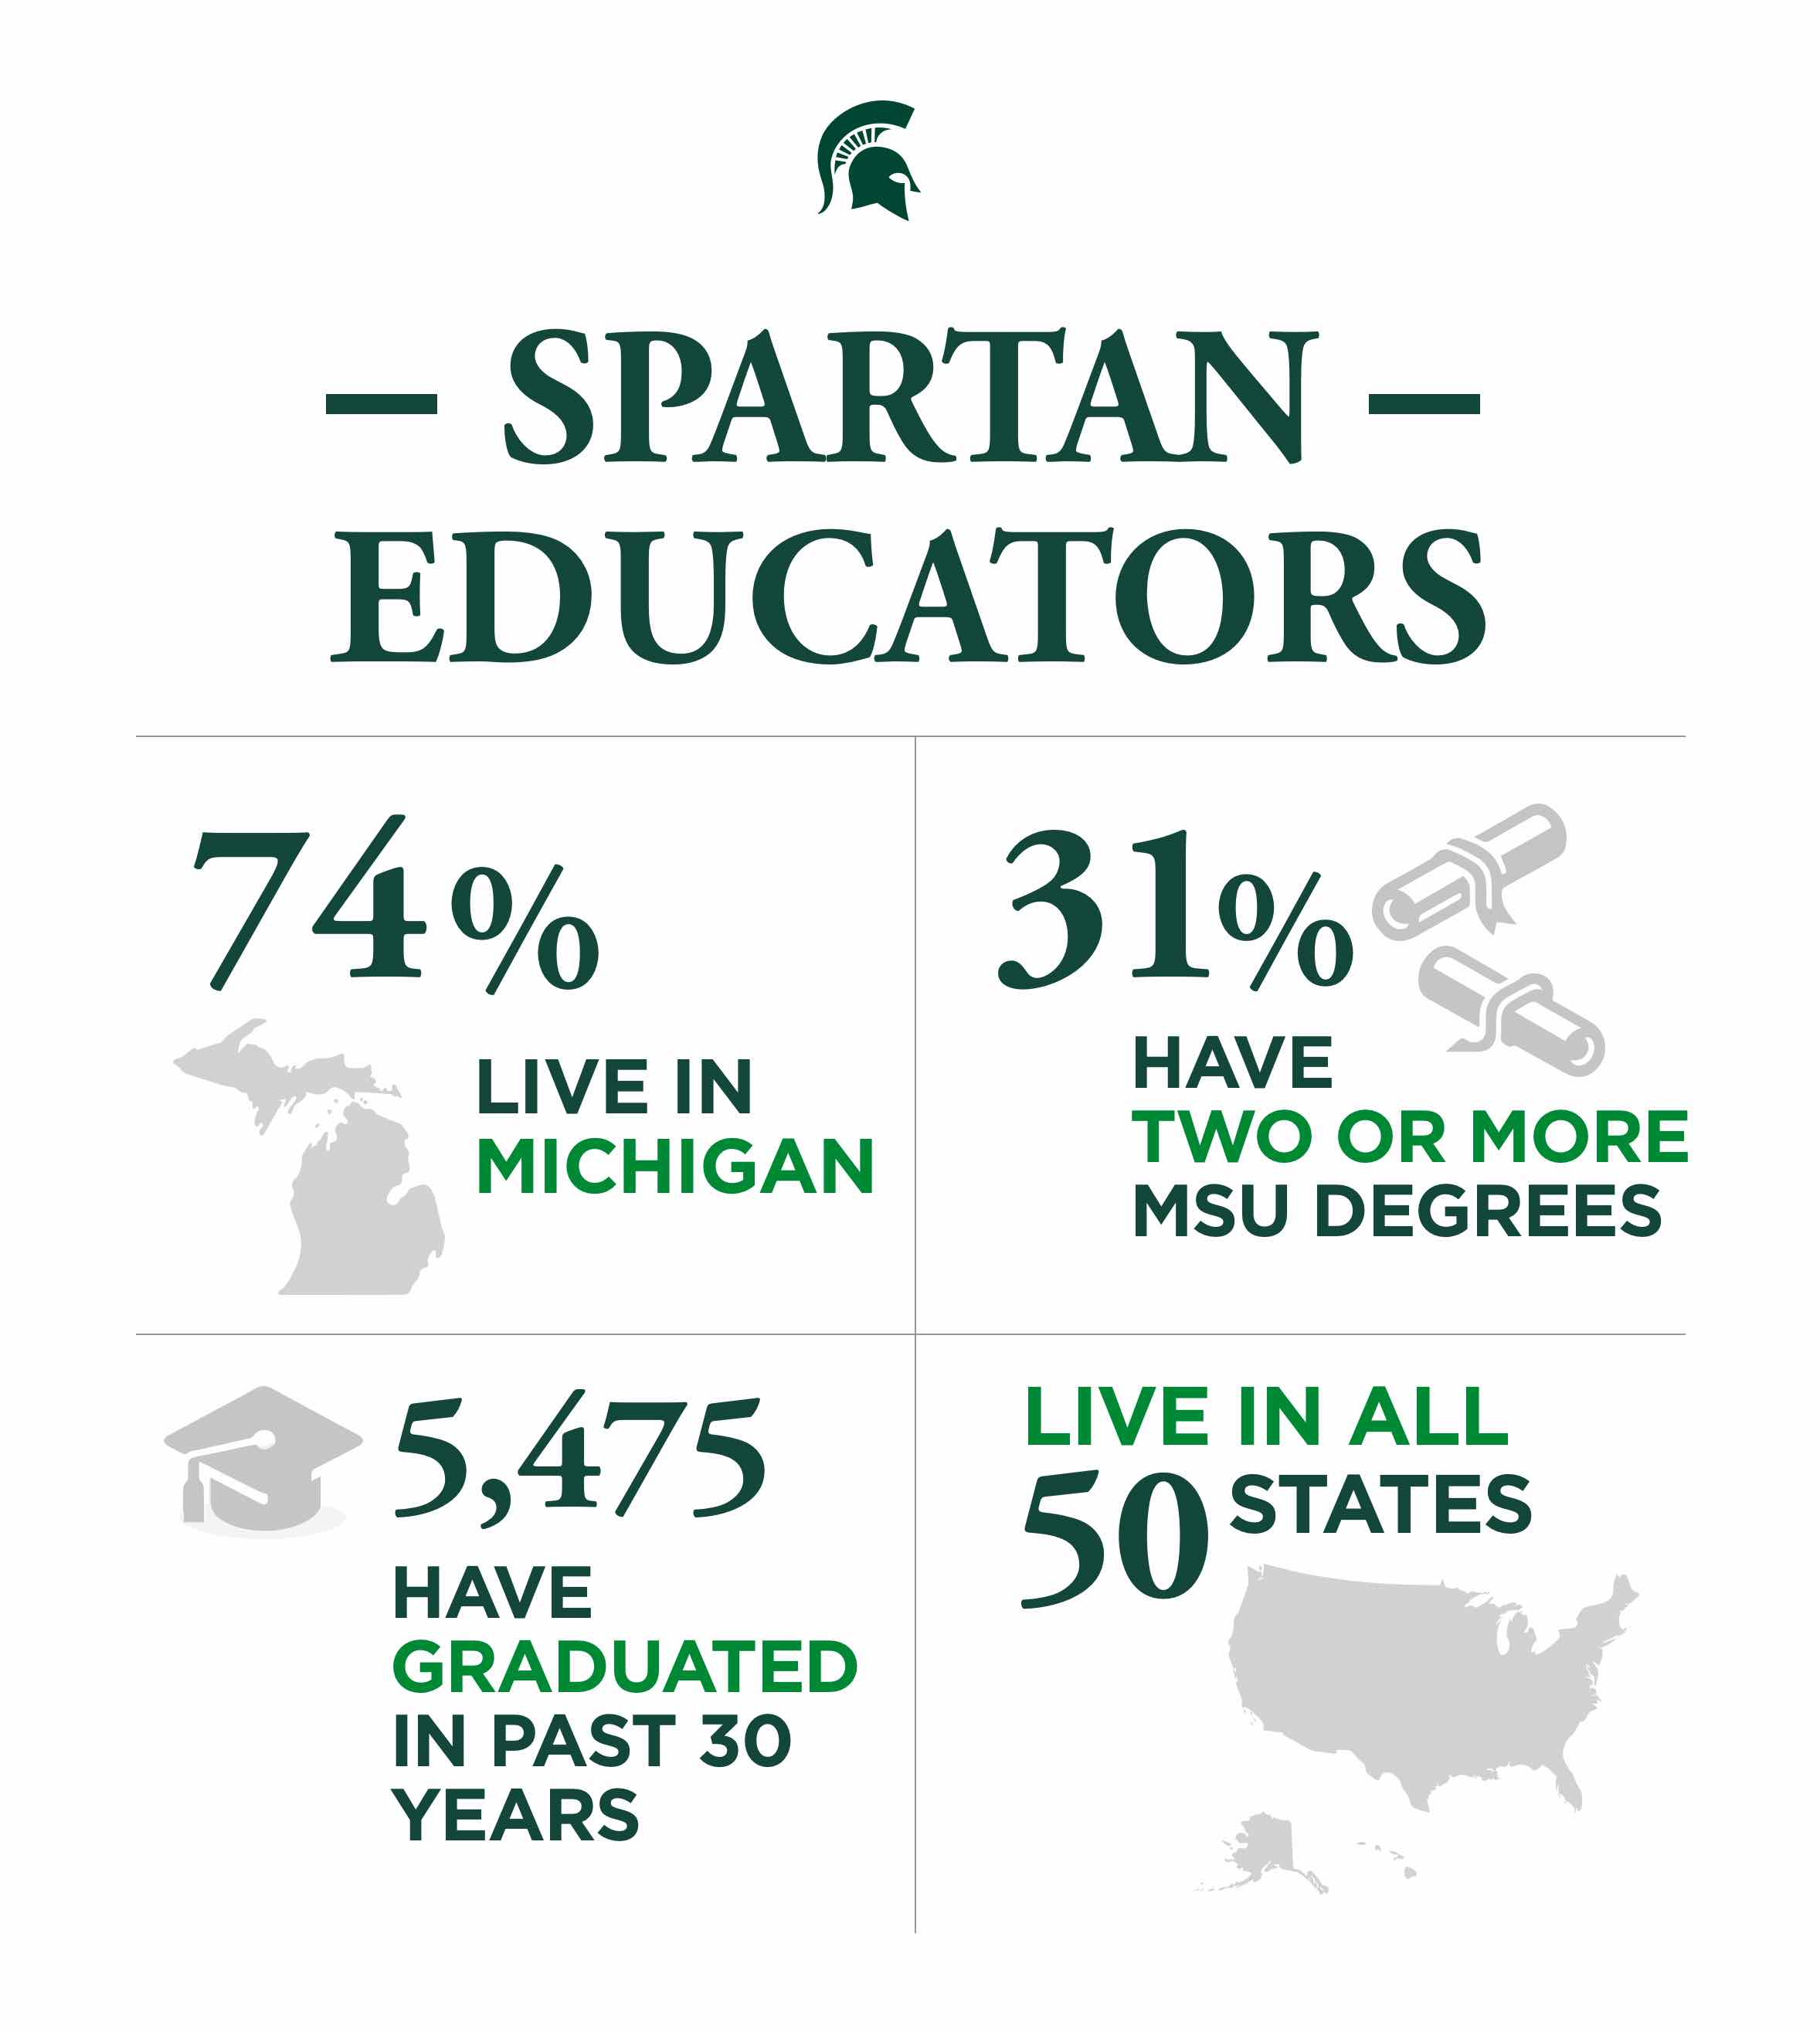 Bar chart on Spartan educator demographics. Shows graduates in the past 30 years. 74% live in Michigan, 31% have two or more MSU degrees, 5,475 graduated and live in all 50 states